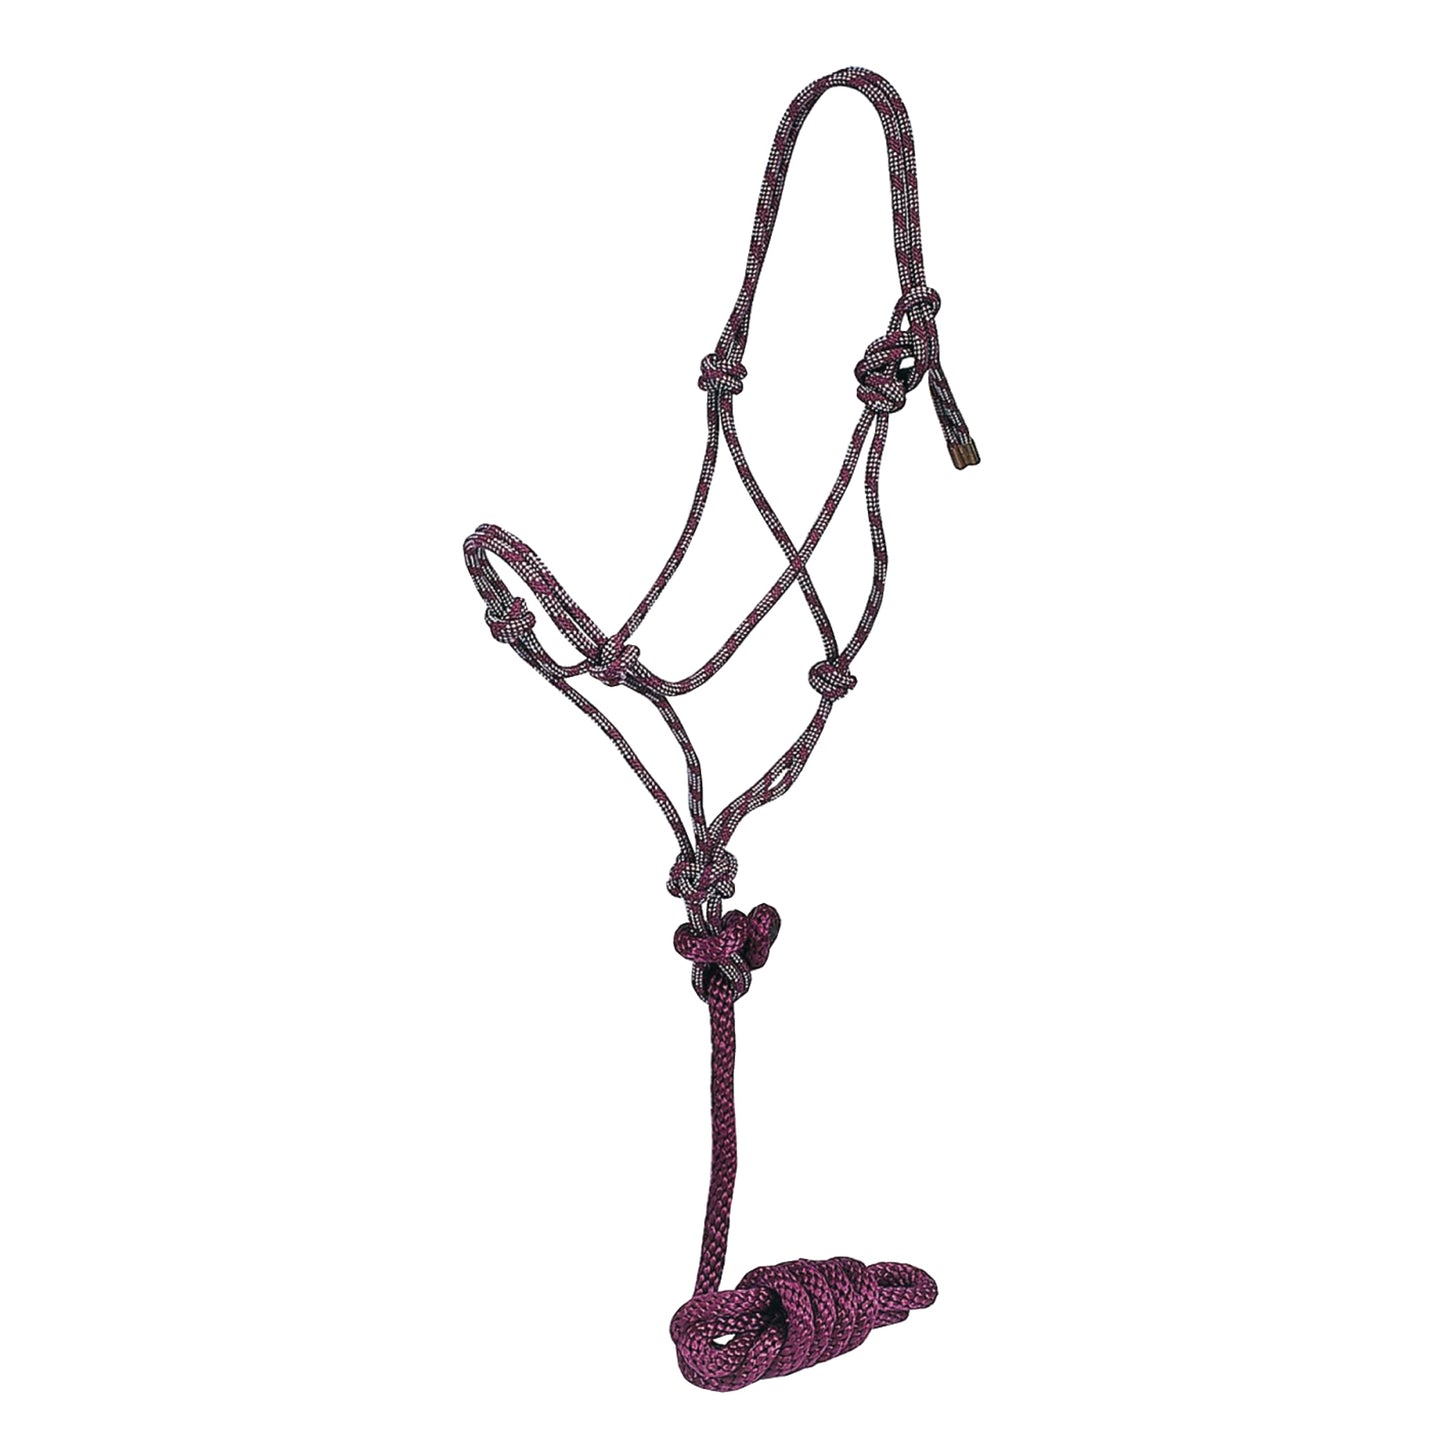 Hand-Tied Rope Halter with attached 8' Long Lead